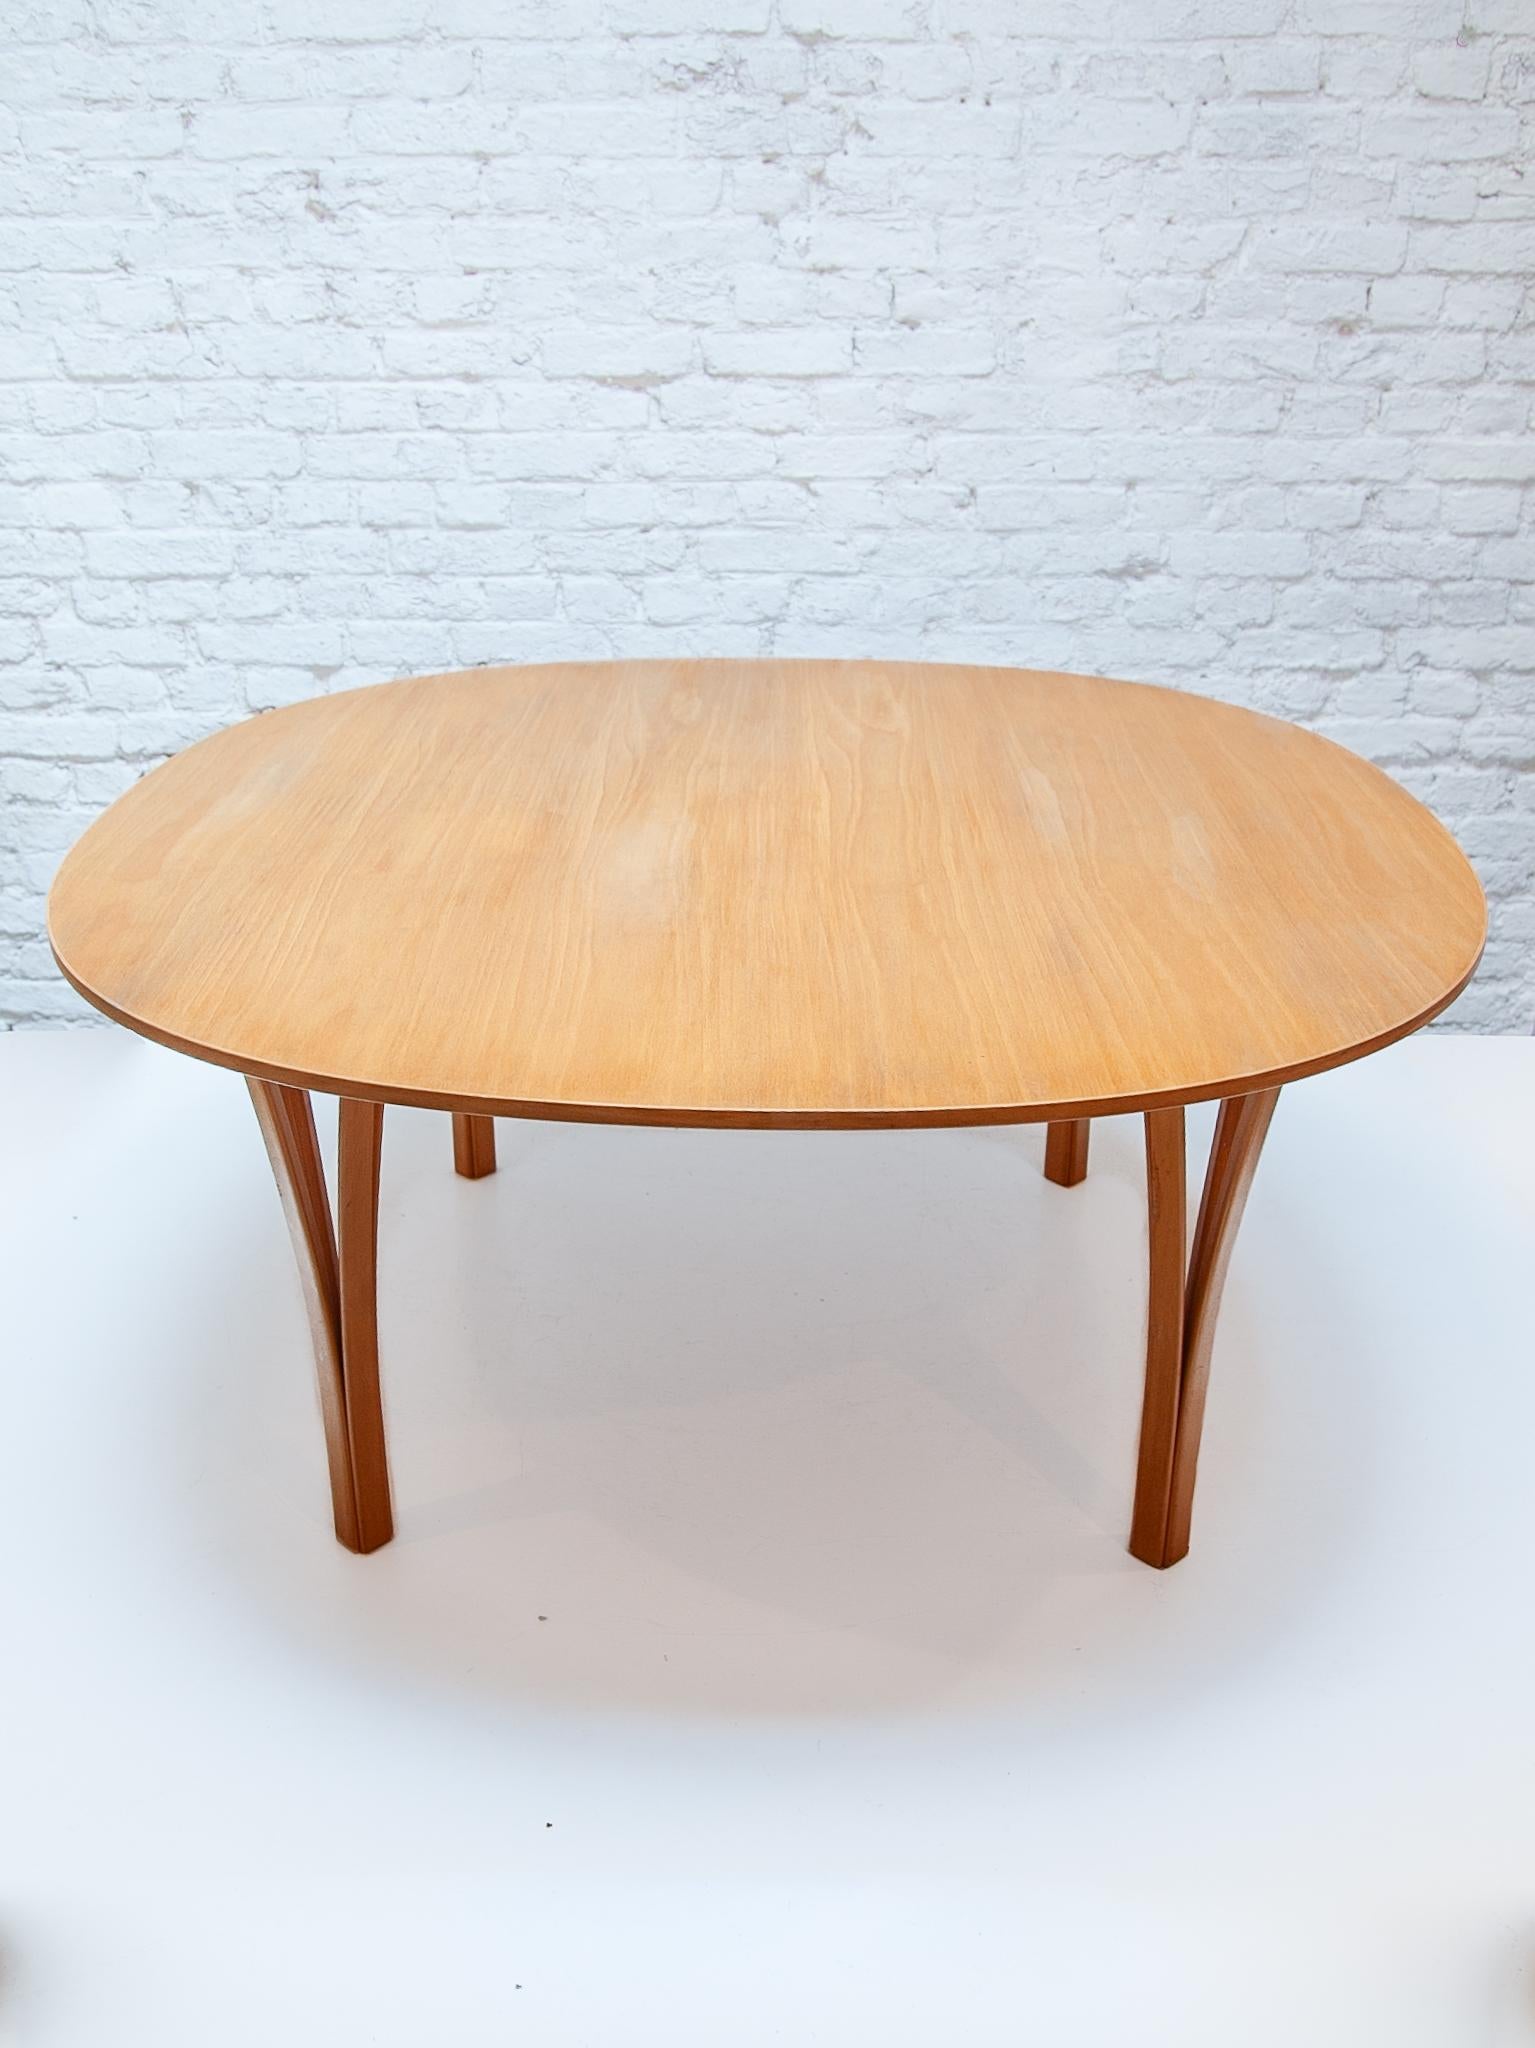  Coffee table designed by Piet Hein & Bruno Mathsson and produced by Fritz Hansen made in Denmark in 1990. This example of the Super-Elliptical with a beautiful top made of walnut with a magnificent wood grain, combined with the signature wooden